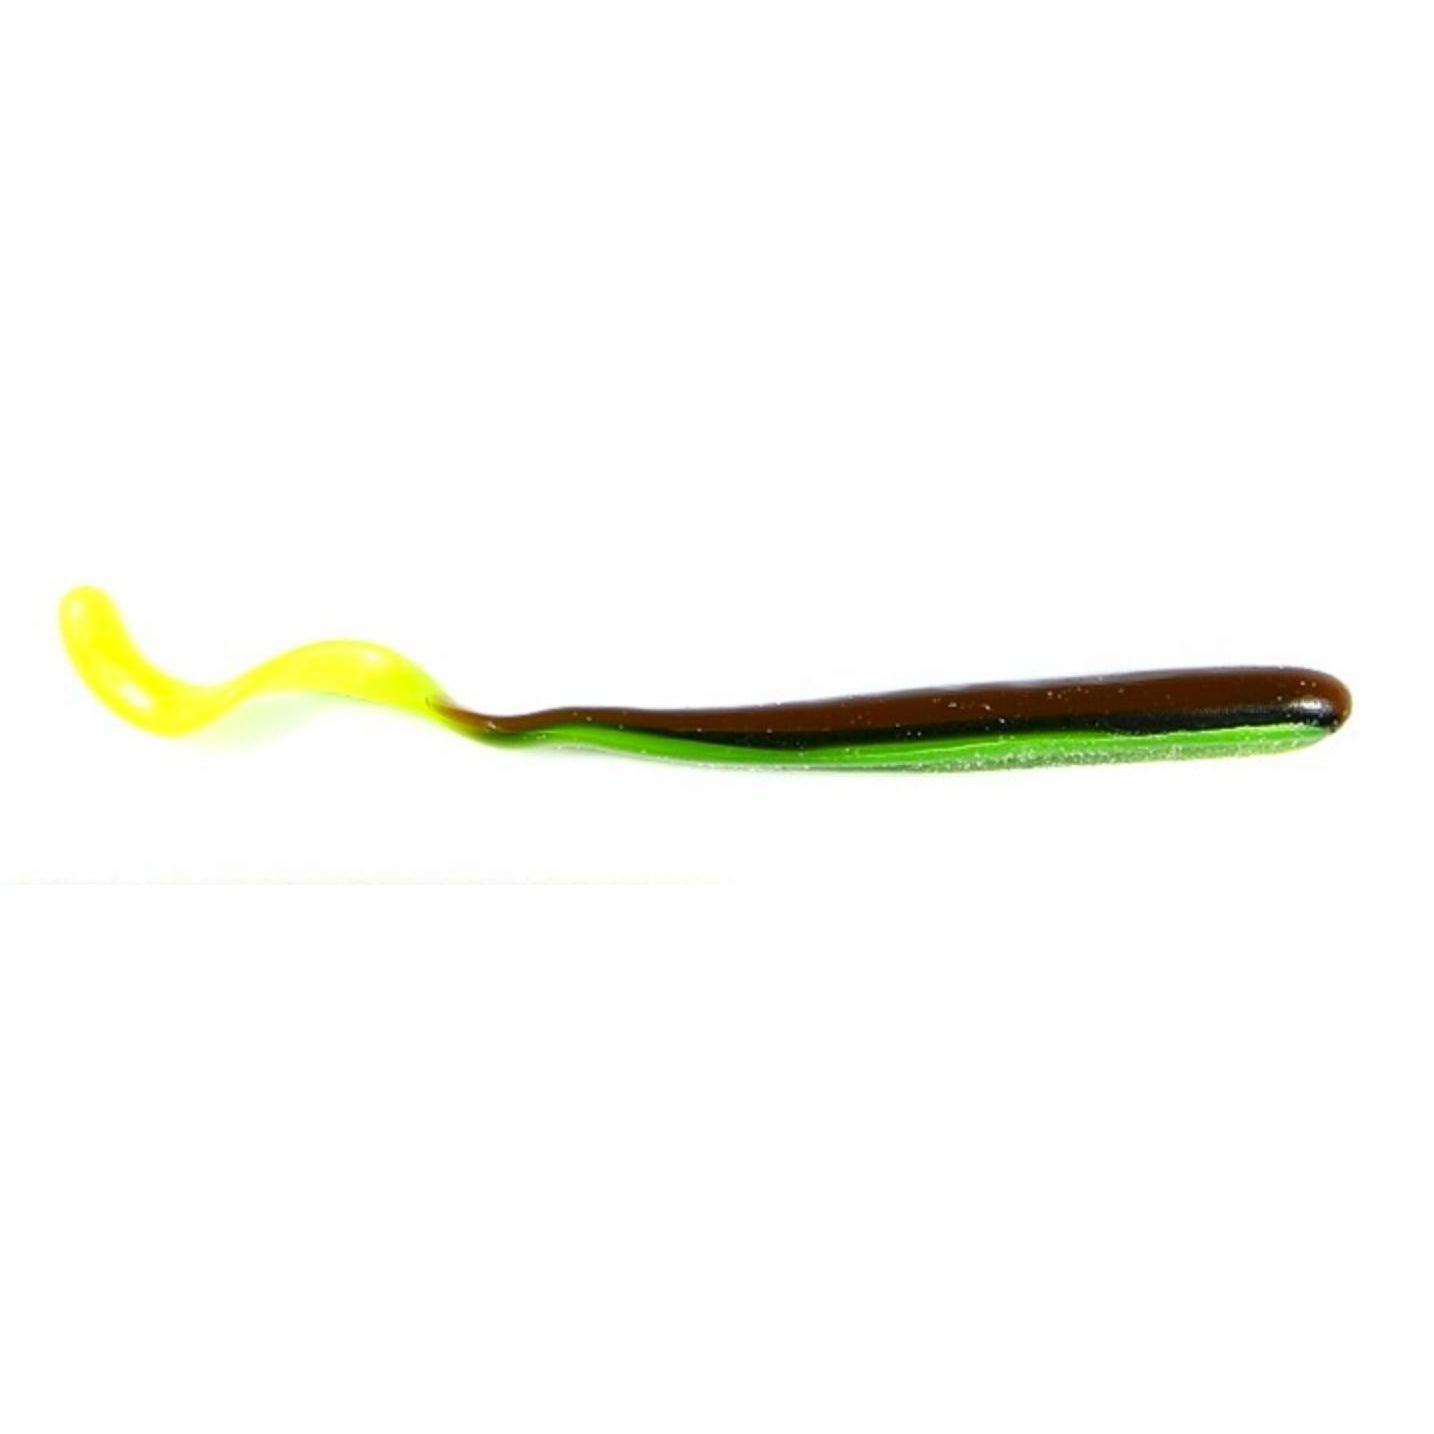 Roboworm Curly Tail Worm - Bold Bluegill